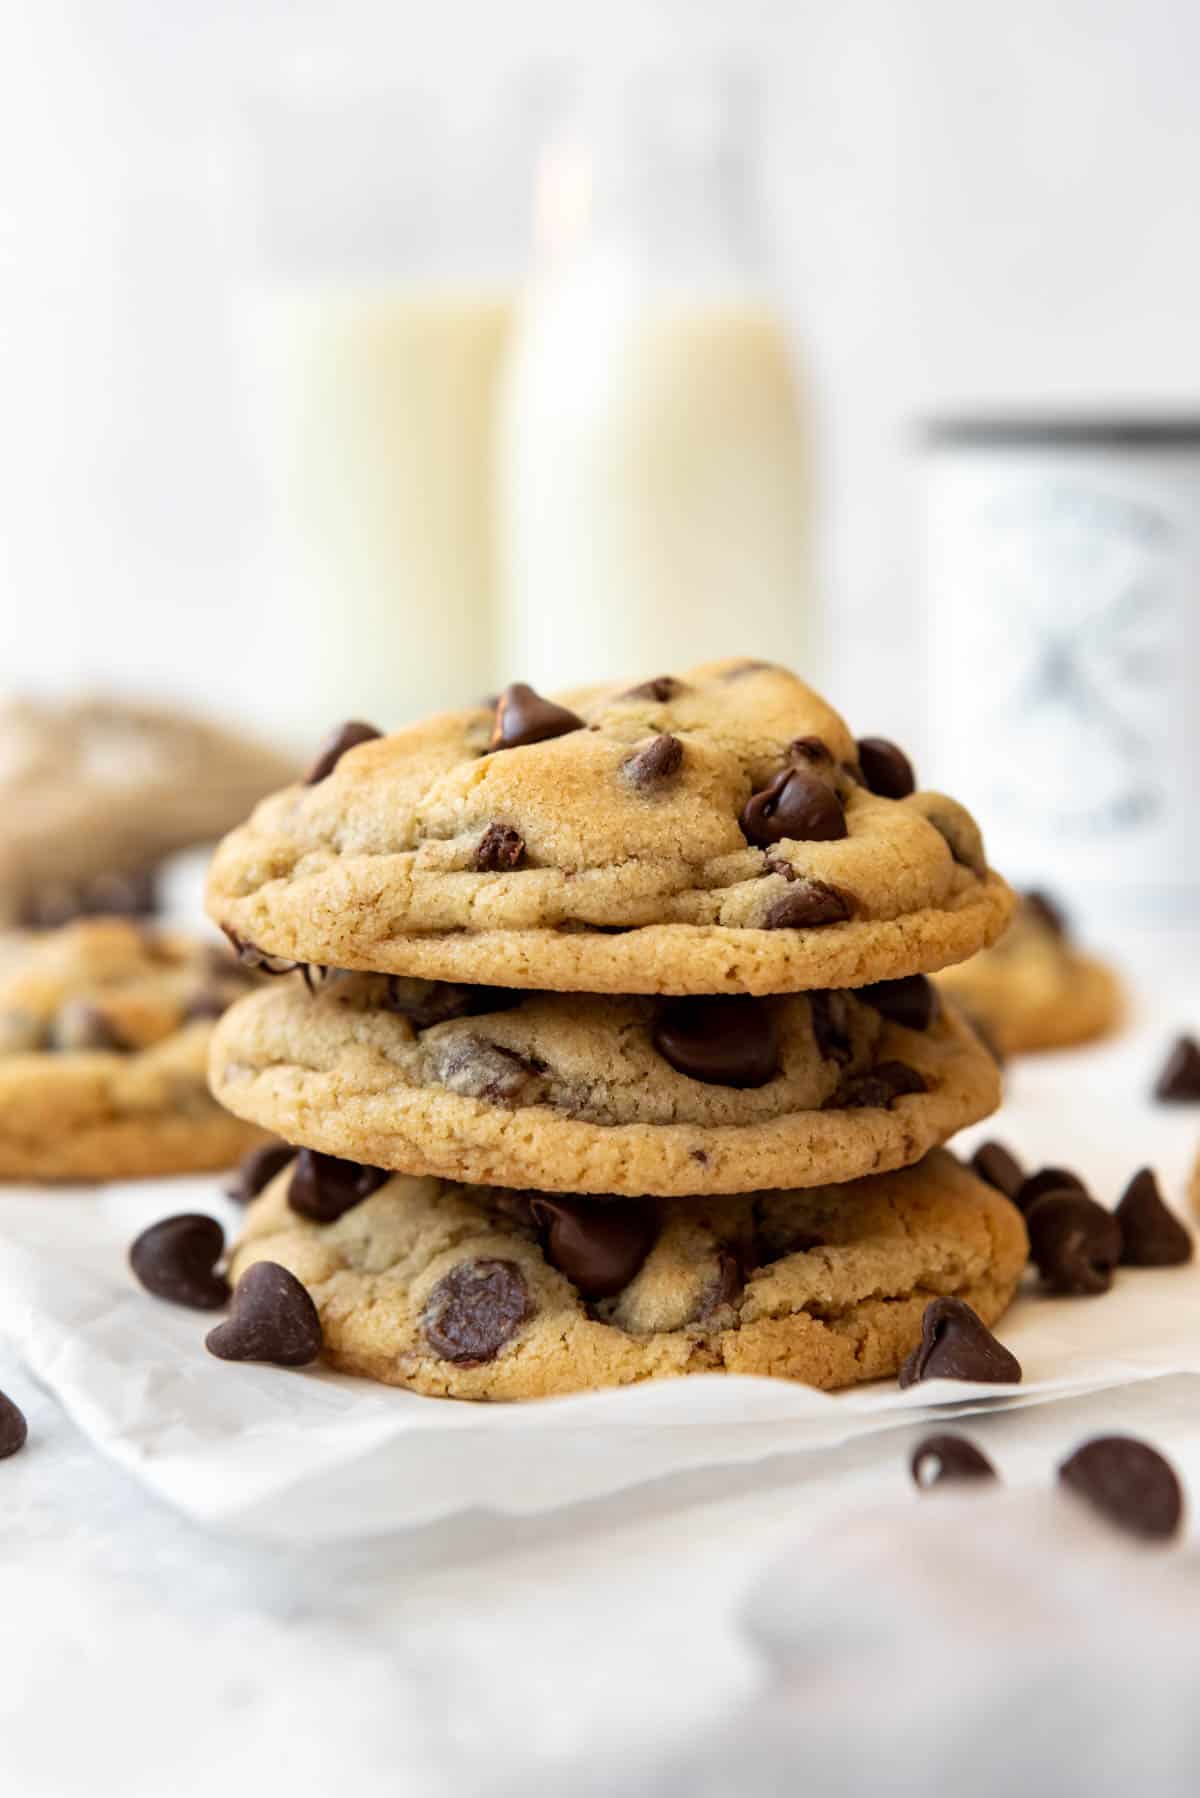 A stack of three chocolate chip cookies.